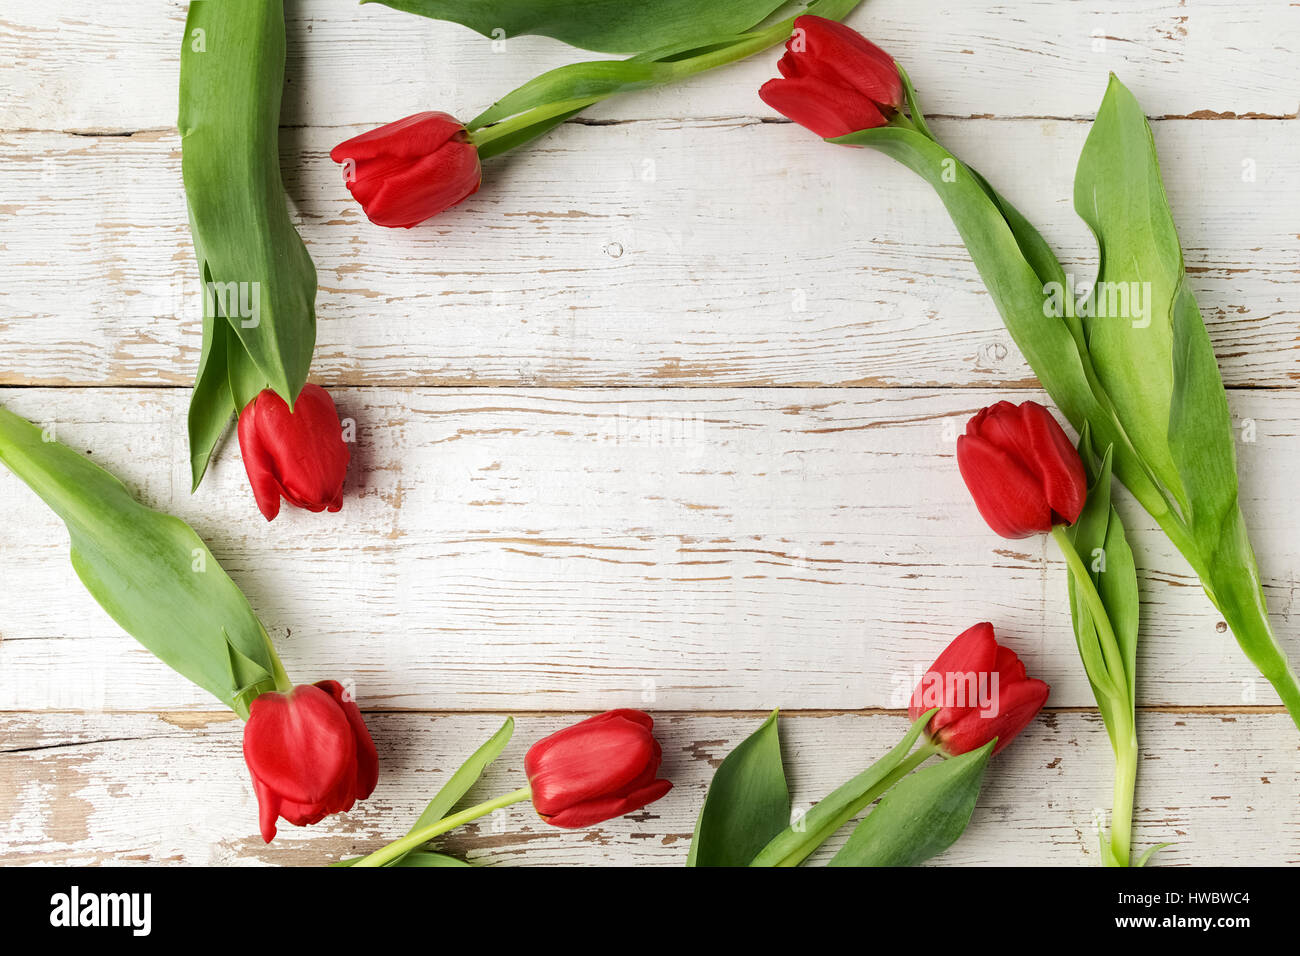 Red tulip flowers on wooden table. Top view with copy space Stock Photo